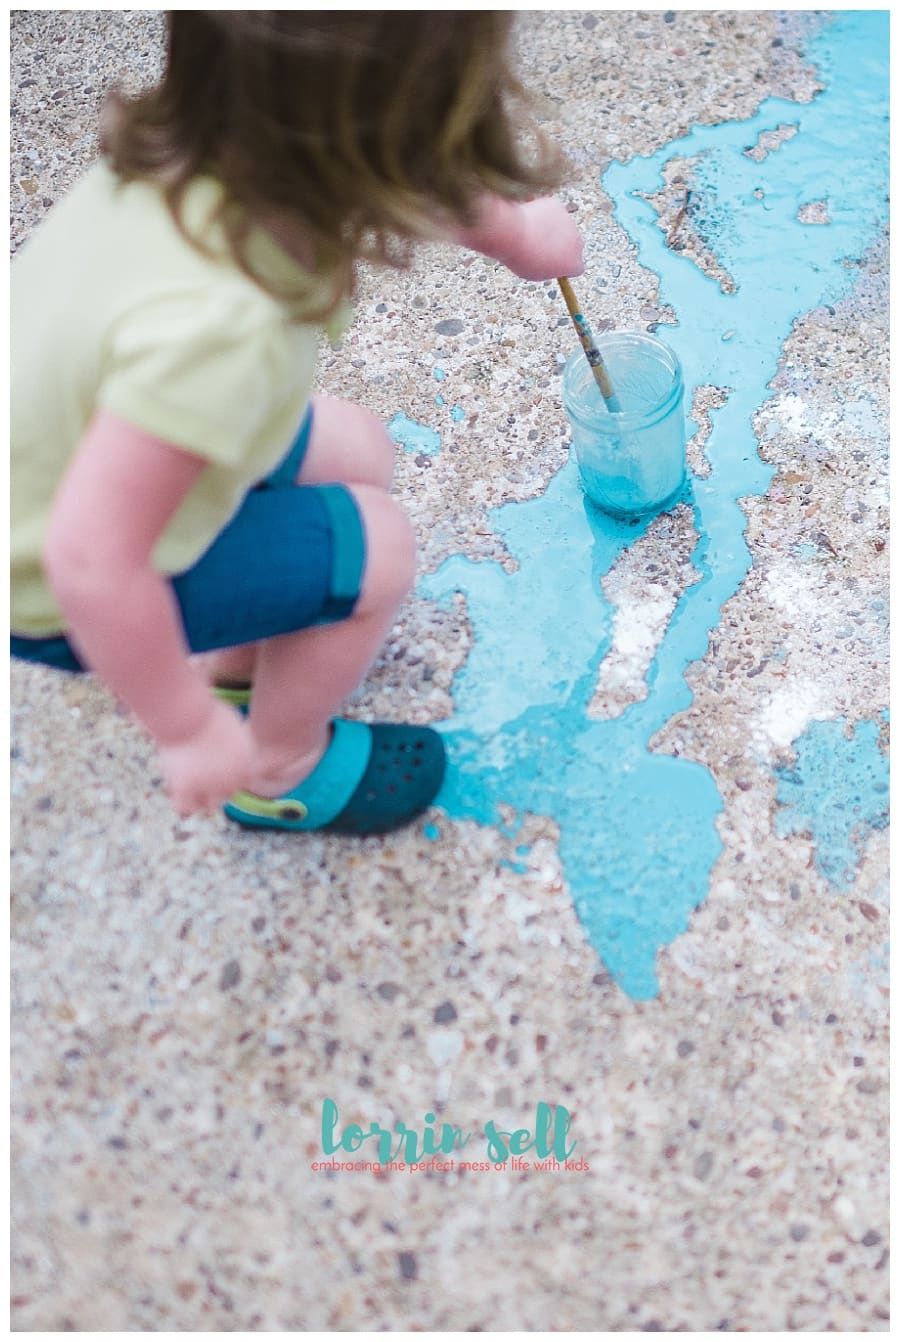 Outdoor Art Kids Crafts and Activities | Outdoor summer projects to entertain and educate | Easy art projects for kids of all ages